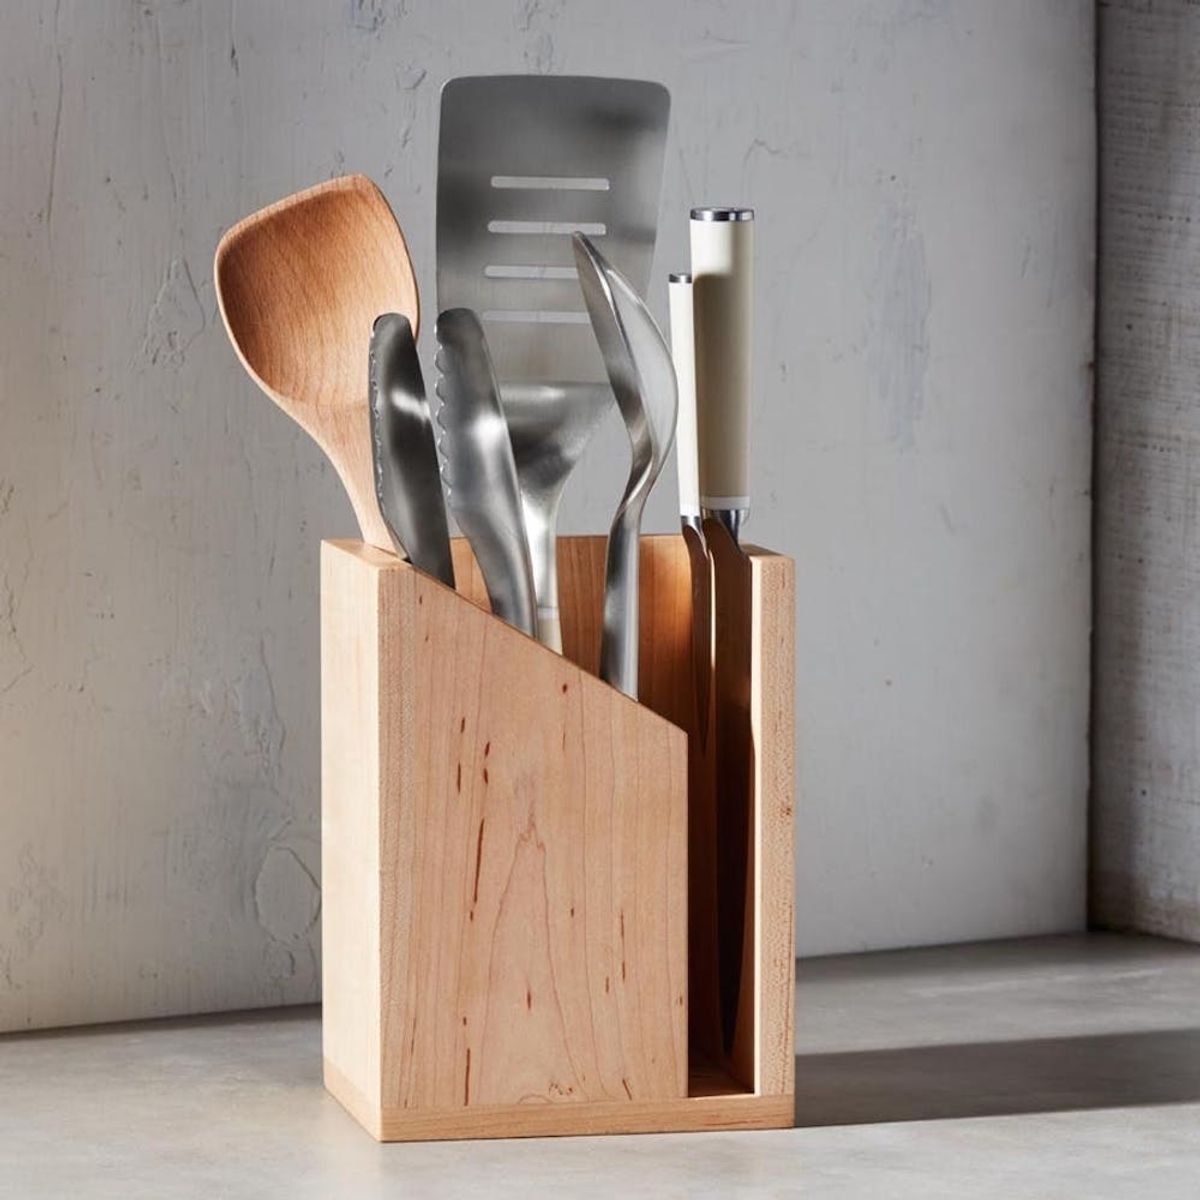 Kitchenware So Cool You Won’t Want to Hide It Away